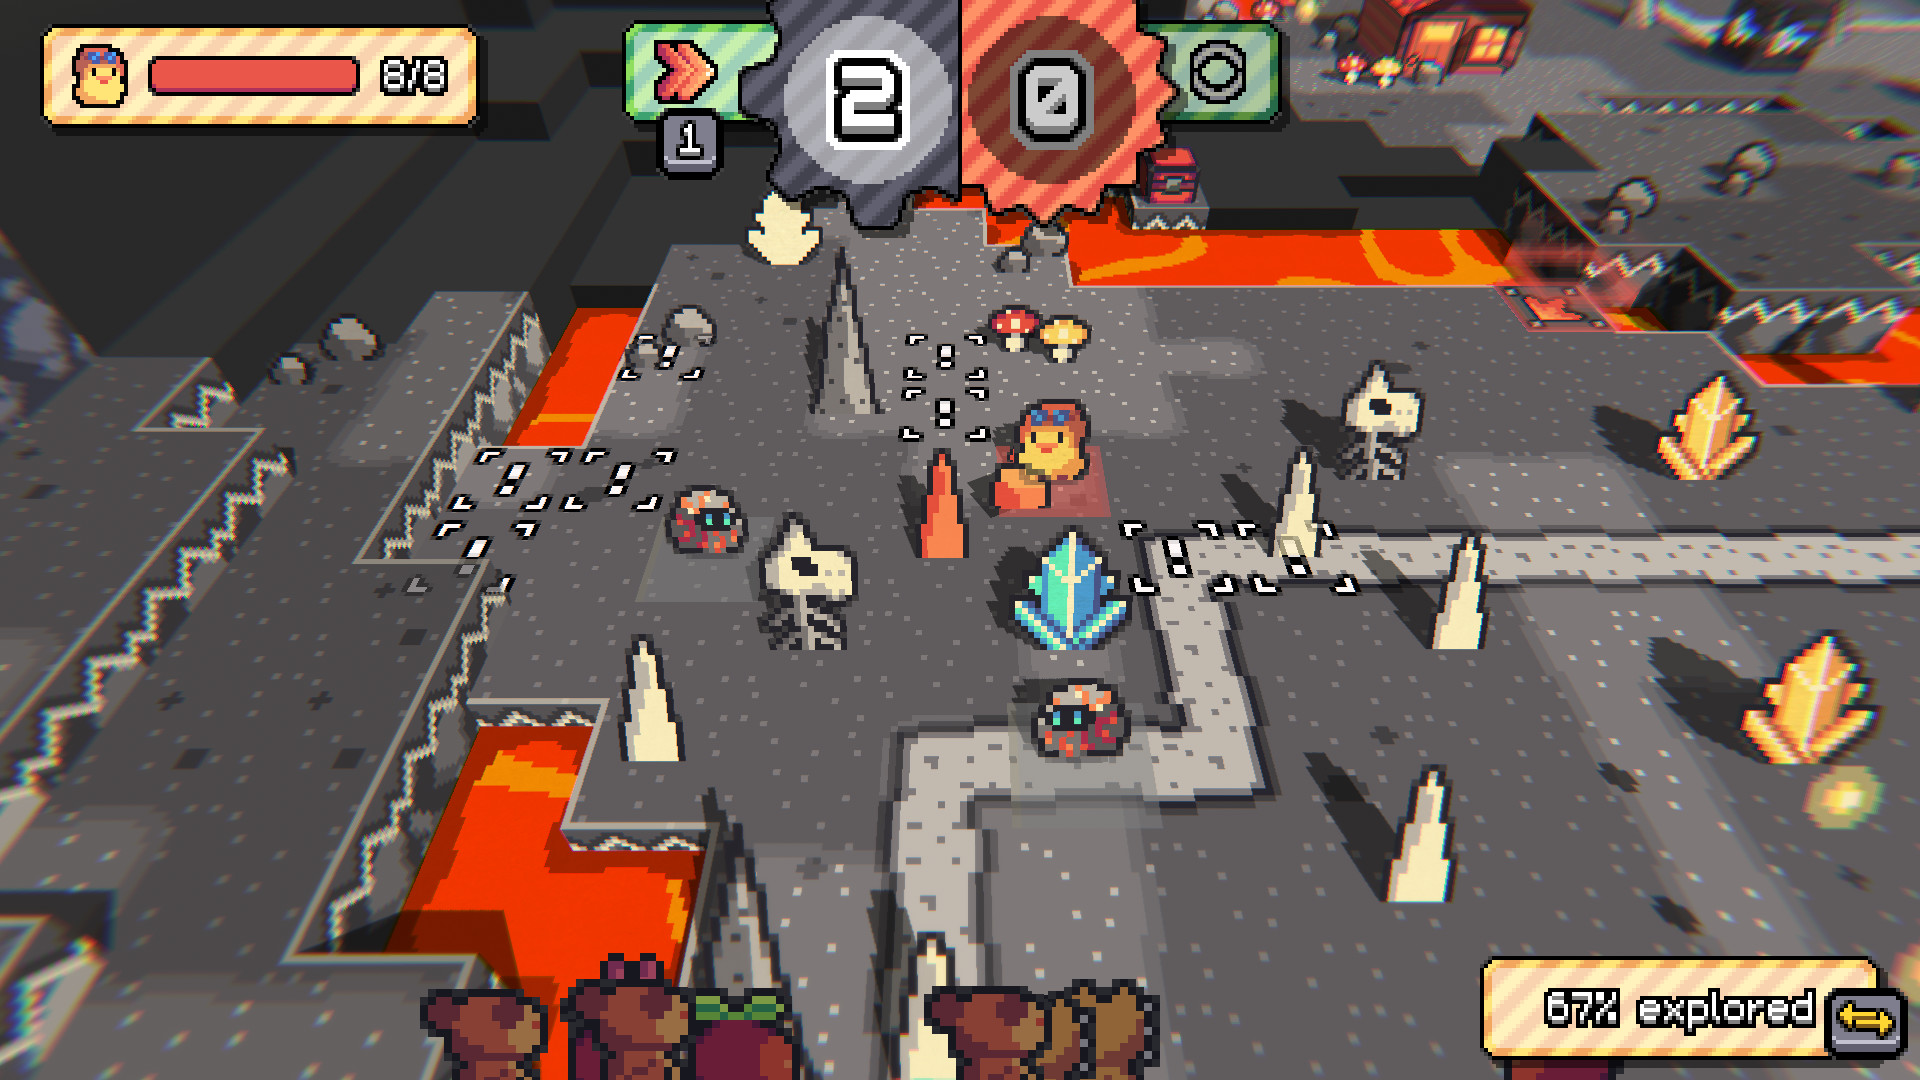 Paper Animal gameplay in a later game, lava pit themed area with charred ash terrain and rivers of lava.